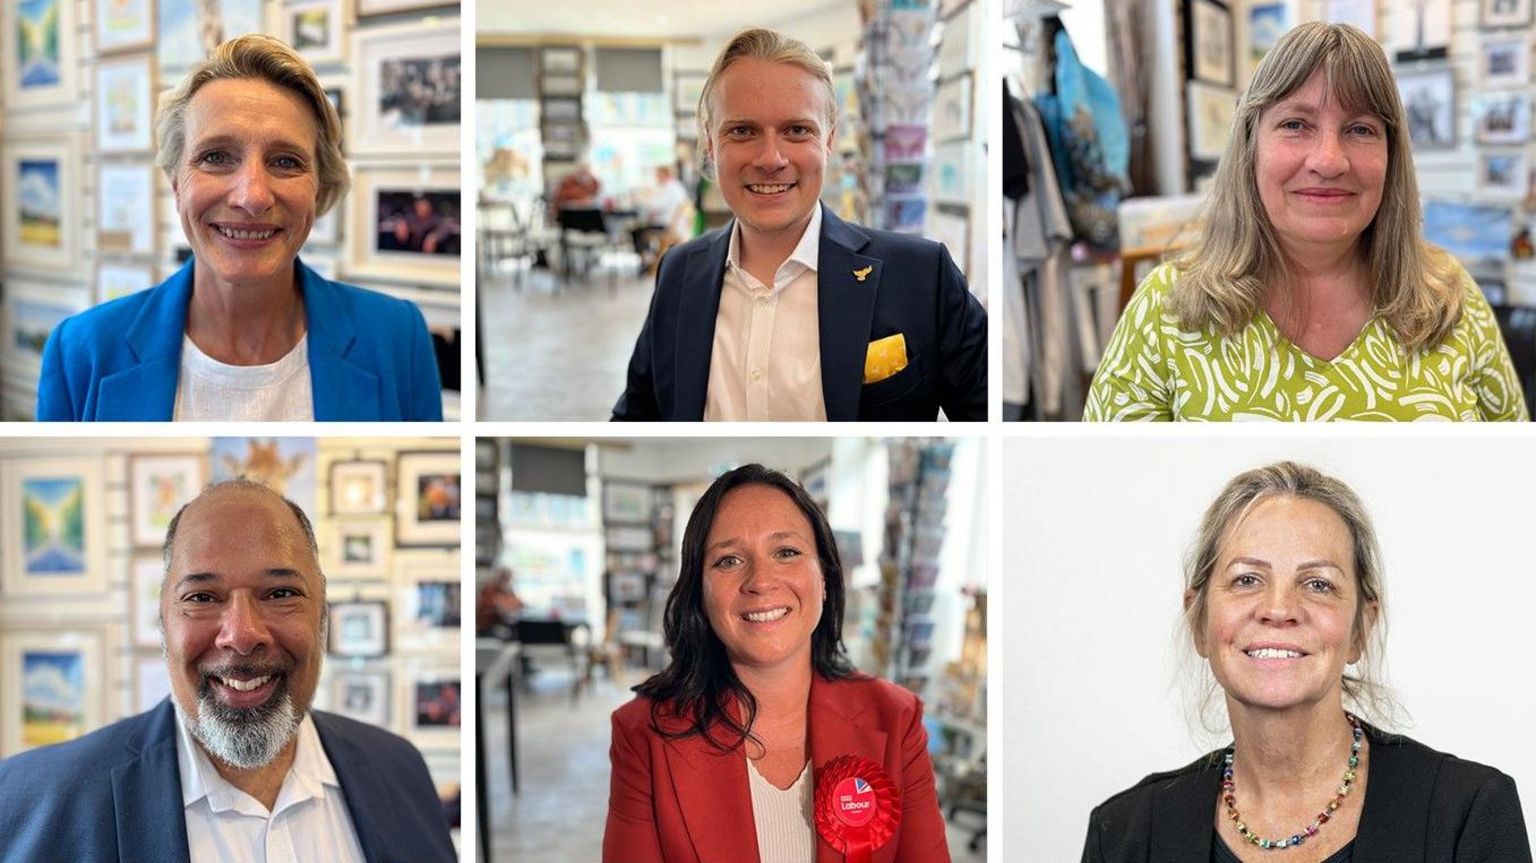 The six Bognor Regis and Littlehampton candidates are (top row from left to right) Conservative Alison Griffiths, Liberal Democrat Henry Jones, Carol Birch for the Green Party, and (bottom row left to right) David Kurten for the Heritage Party, Labour's Clare Walsh and Reform UK's Sandra Daniells